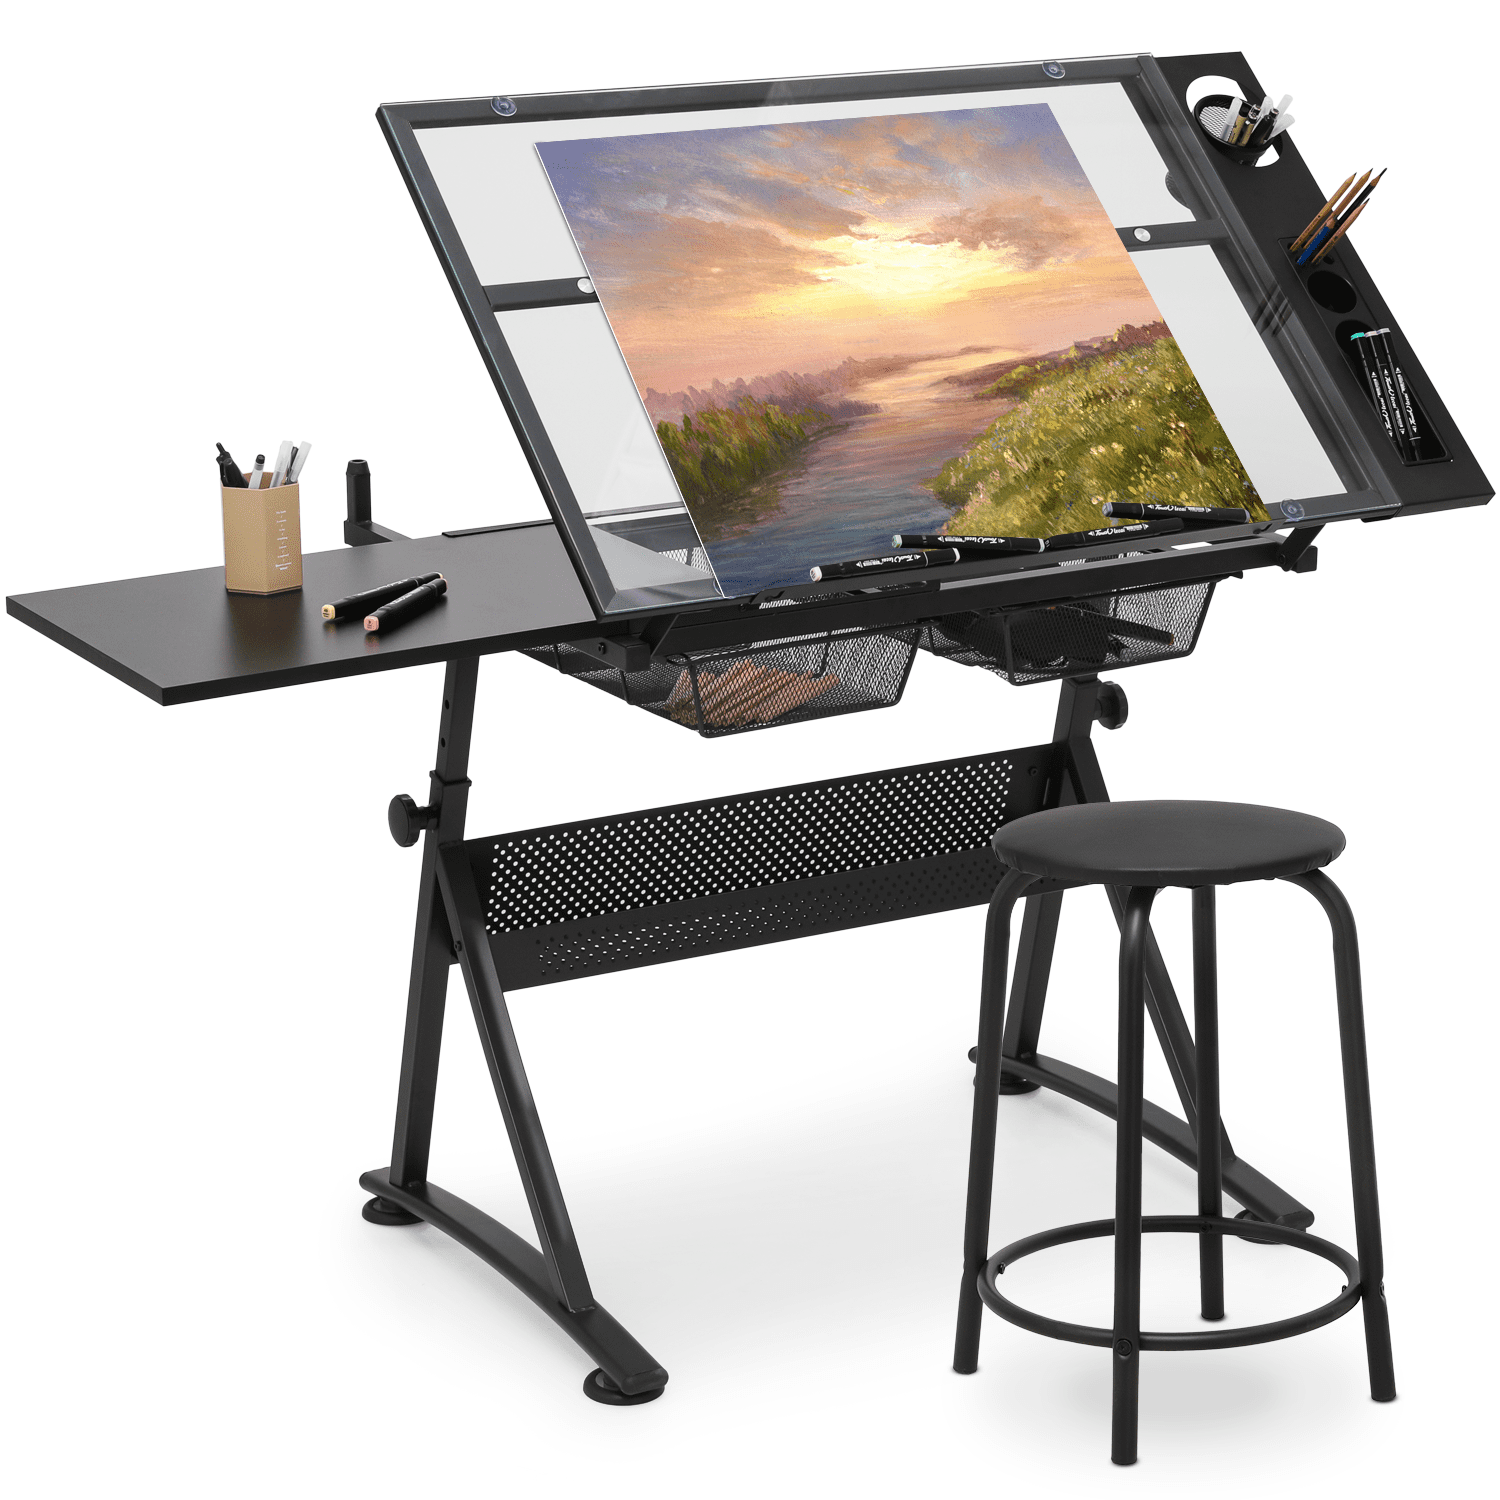  SogesPower Adjustable Glass Drafting Table Drawing Desk Diamond  Art Desk Versatile Art Craft Station Study Table w/ 2 Slide Rolling Wheels  and Drawers for Artist Painters Home Office : Home 